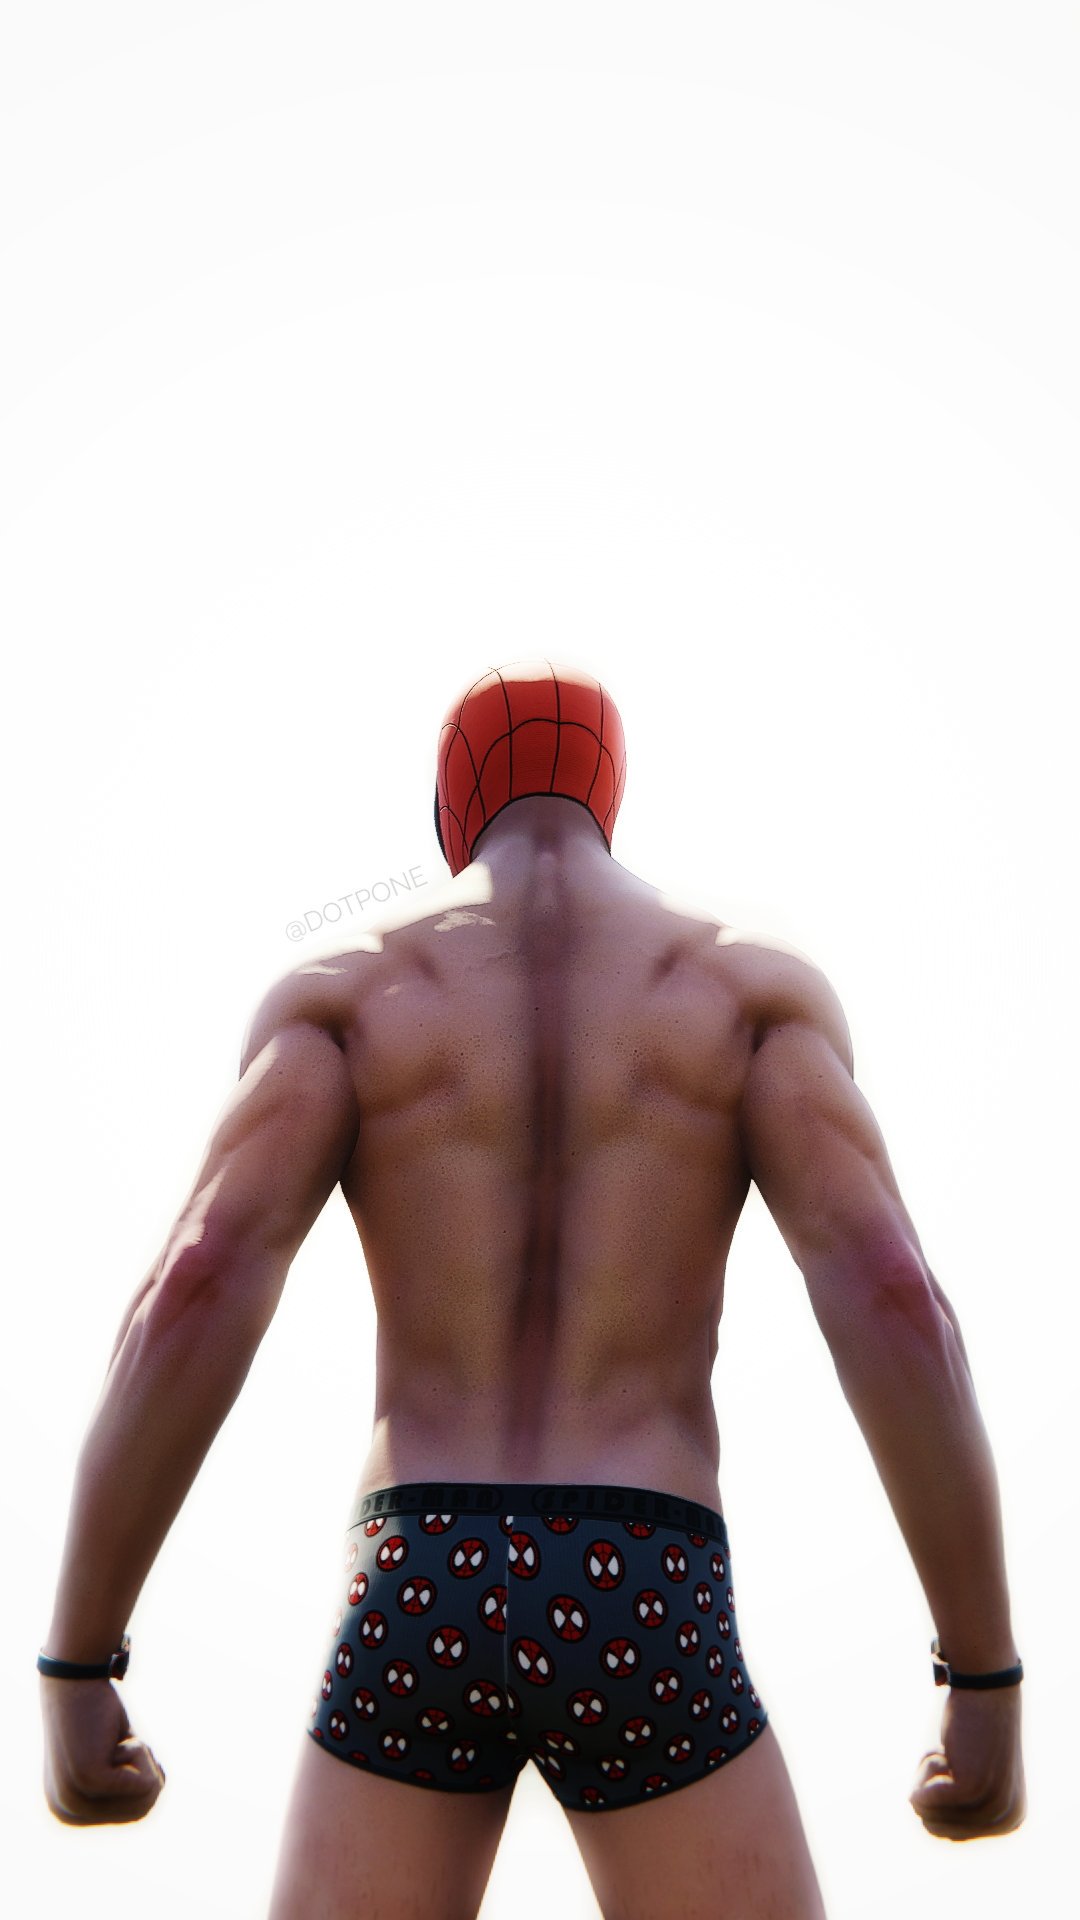 Rúben on X: Game: #SpiderManPS4 Studio: @insomniacgames Suit: Undies First  Appearance: Marvel's Spider-Man (2018) 📷📸📷📸📷 #VGPUnite # VirtualPhotography #PS4share #SpiderManPS4 #SpiderMan #PhotoMode # Gametography #GamerGram #Playstation4